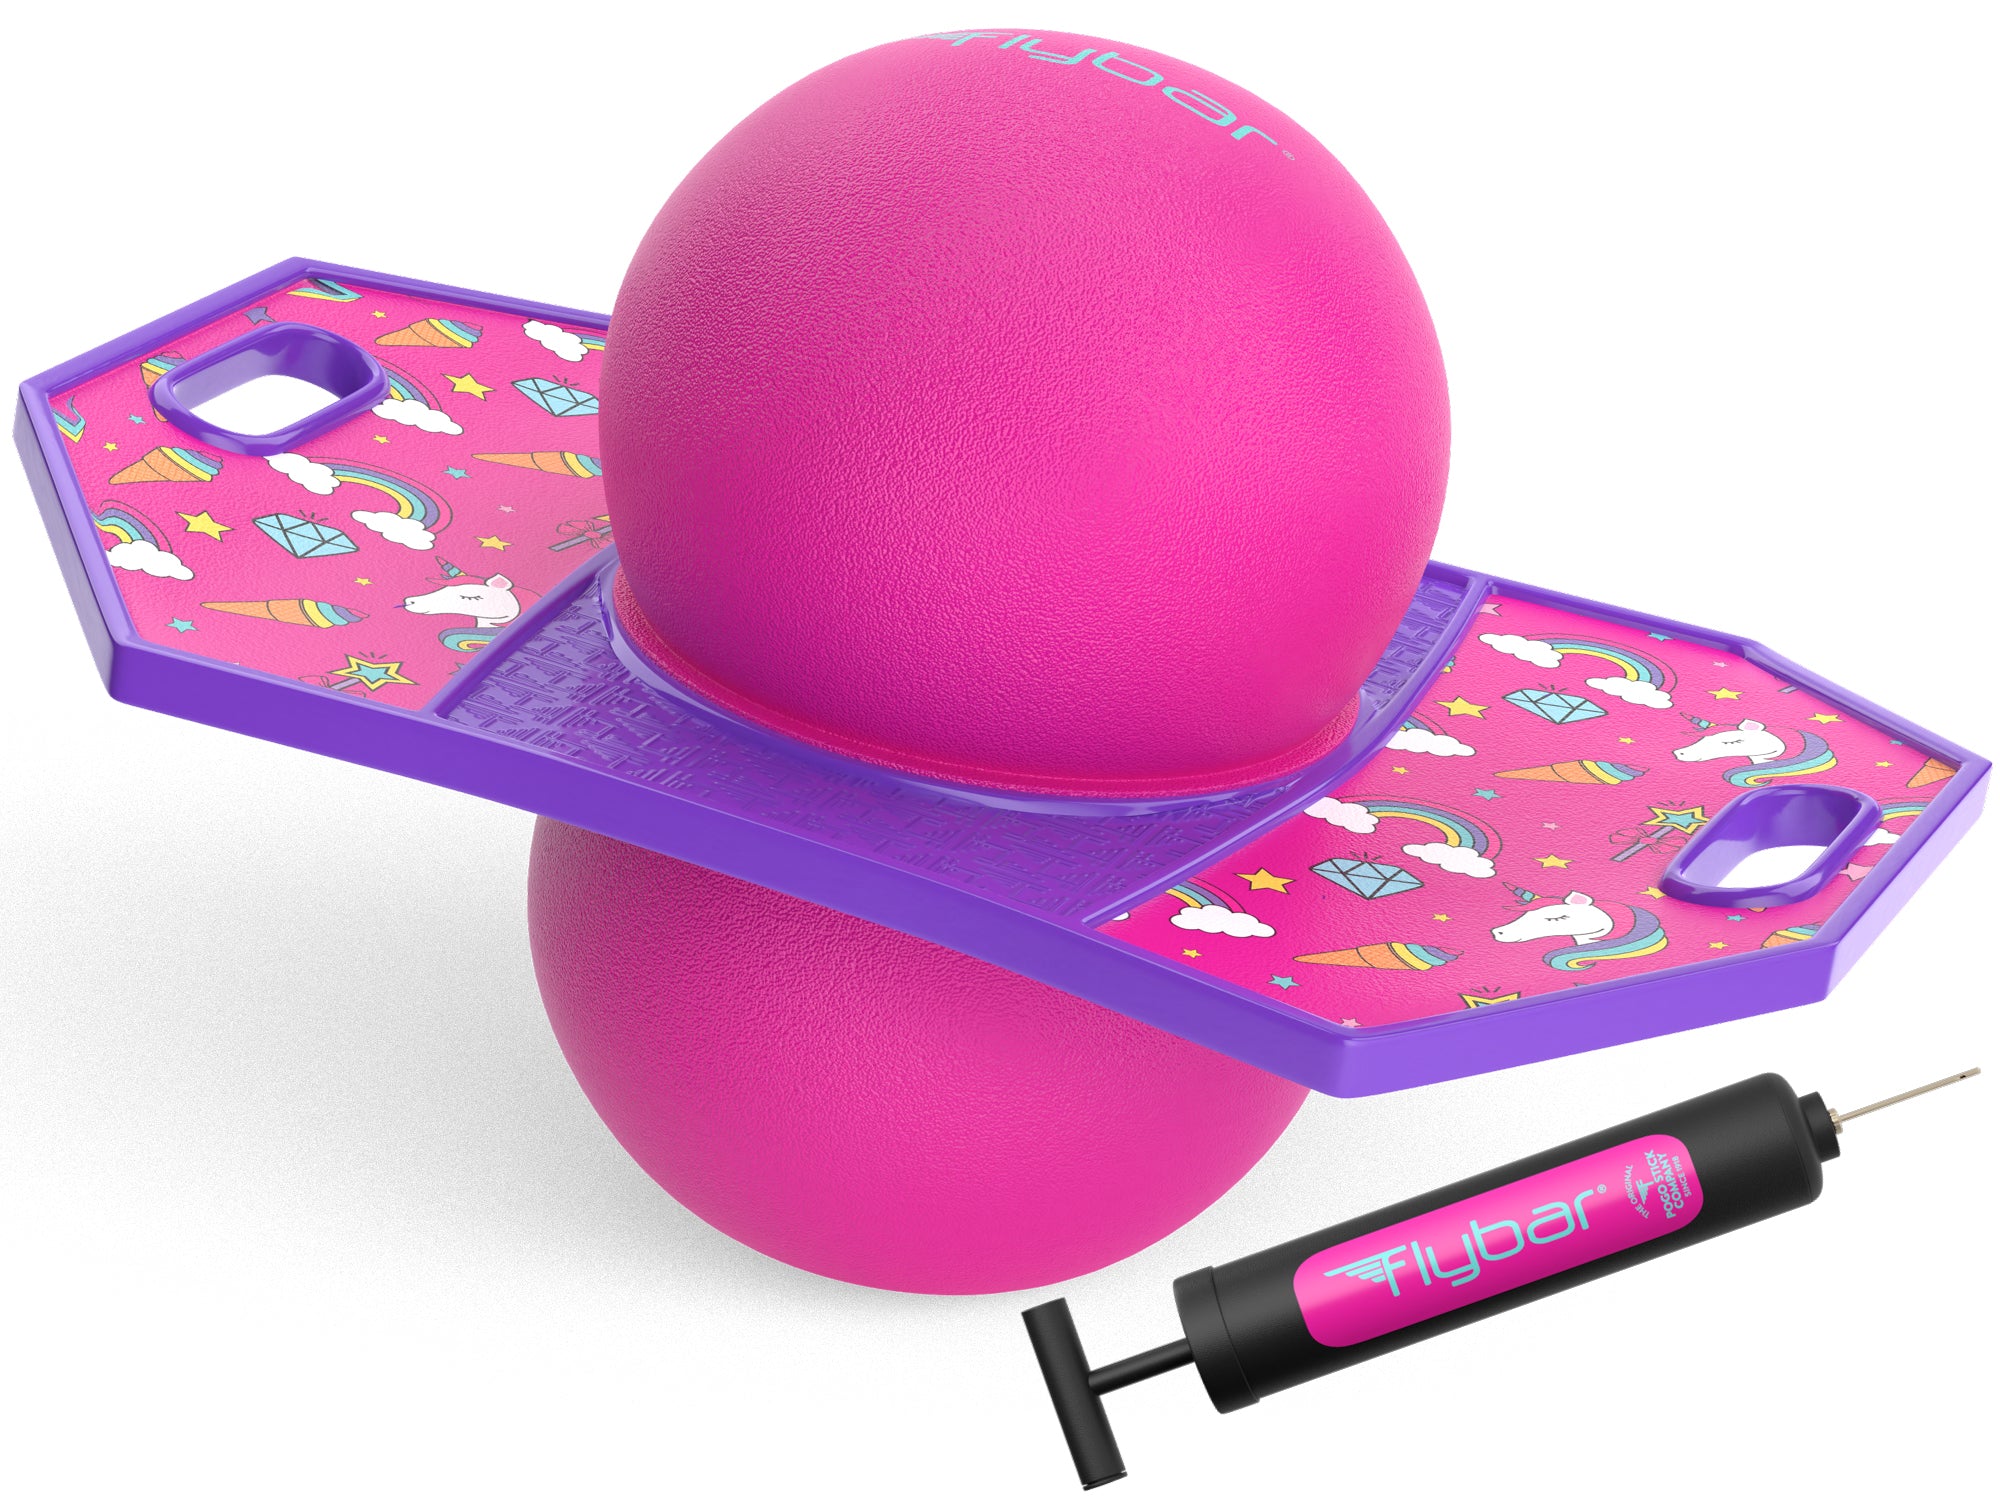 Flybar Pogo Ball Trick Board With Grip Tape For Kids Ages 6 & Up - Multiple Colors Available